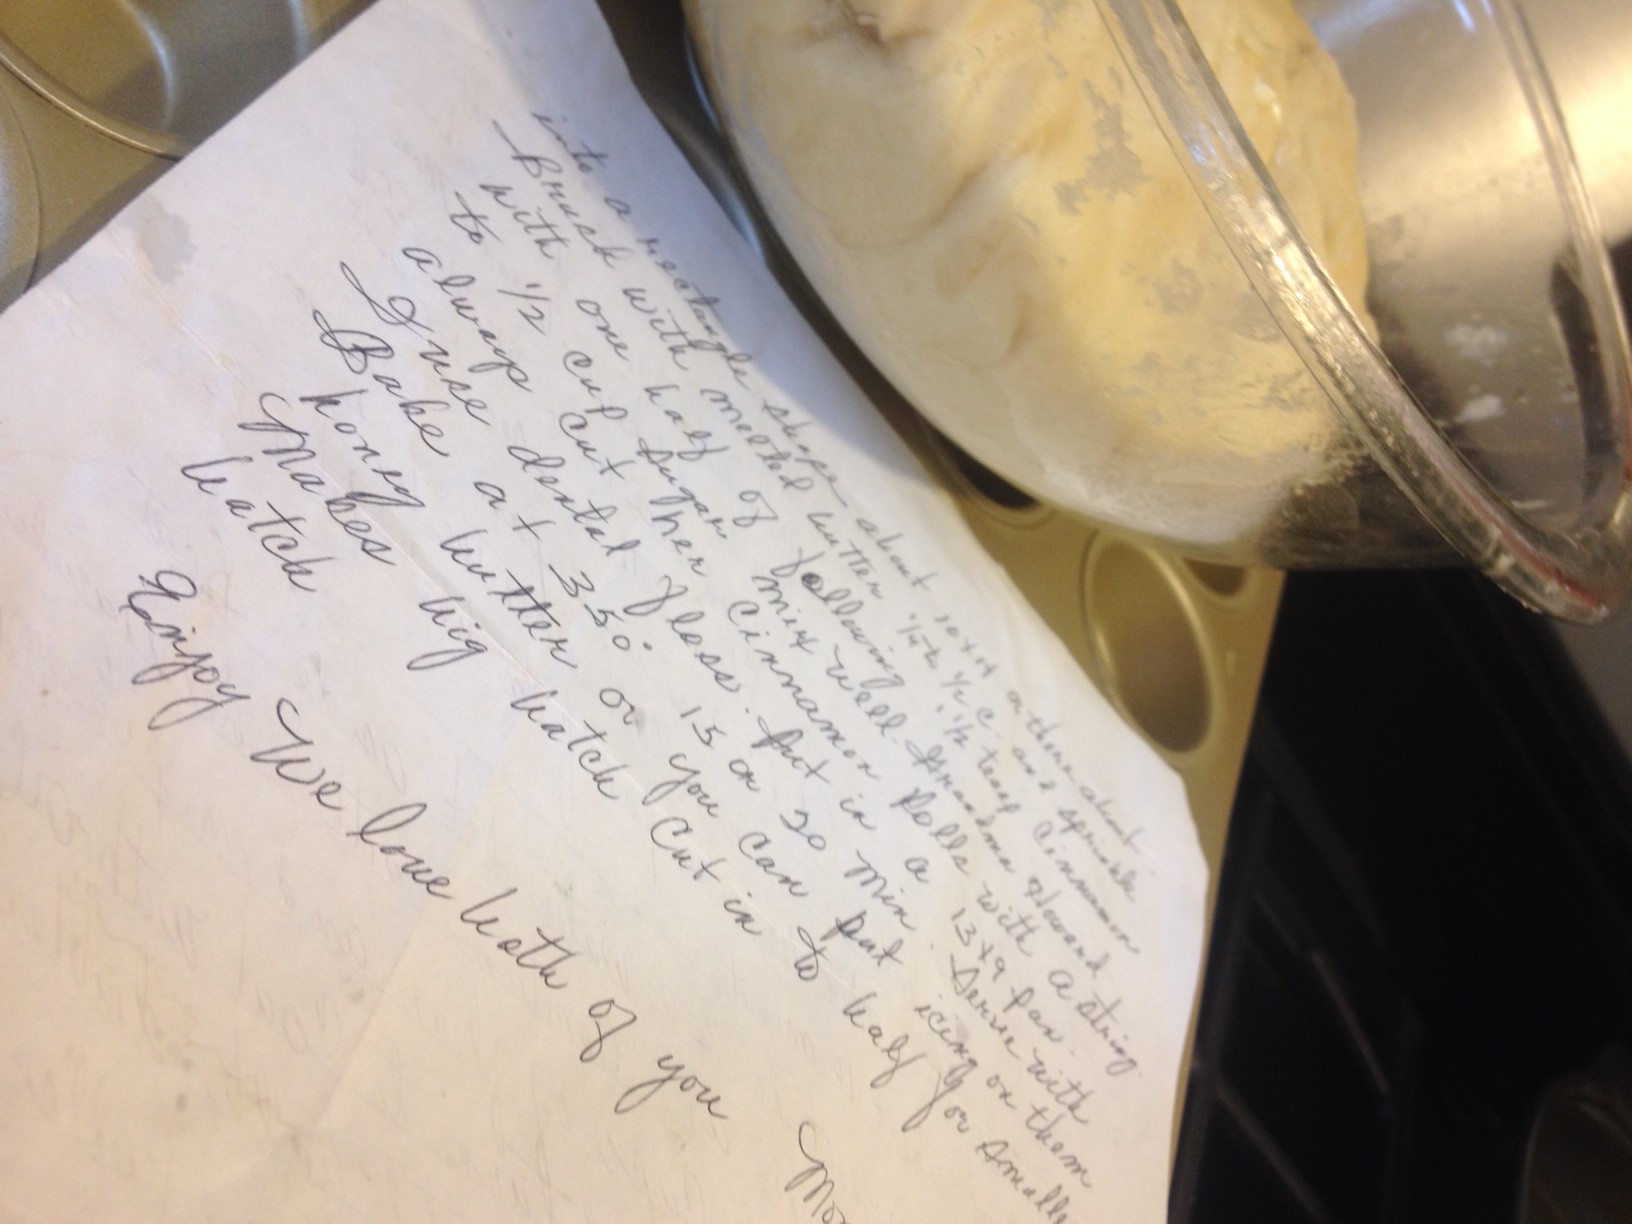 Grandma's recipe in my mom's handwriting -- the dough is in the background.